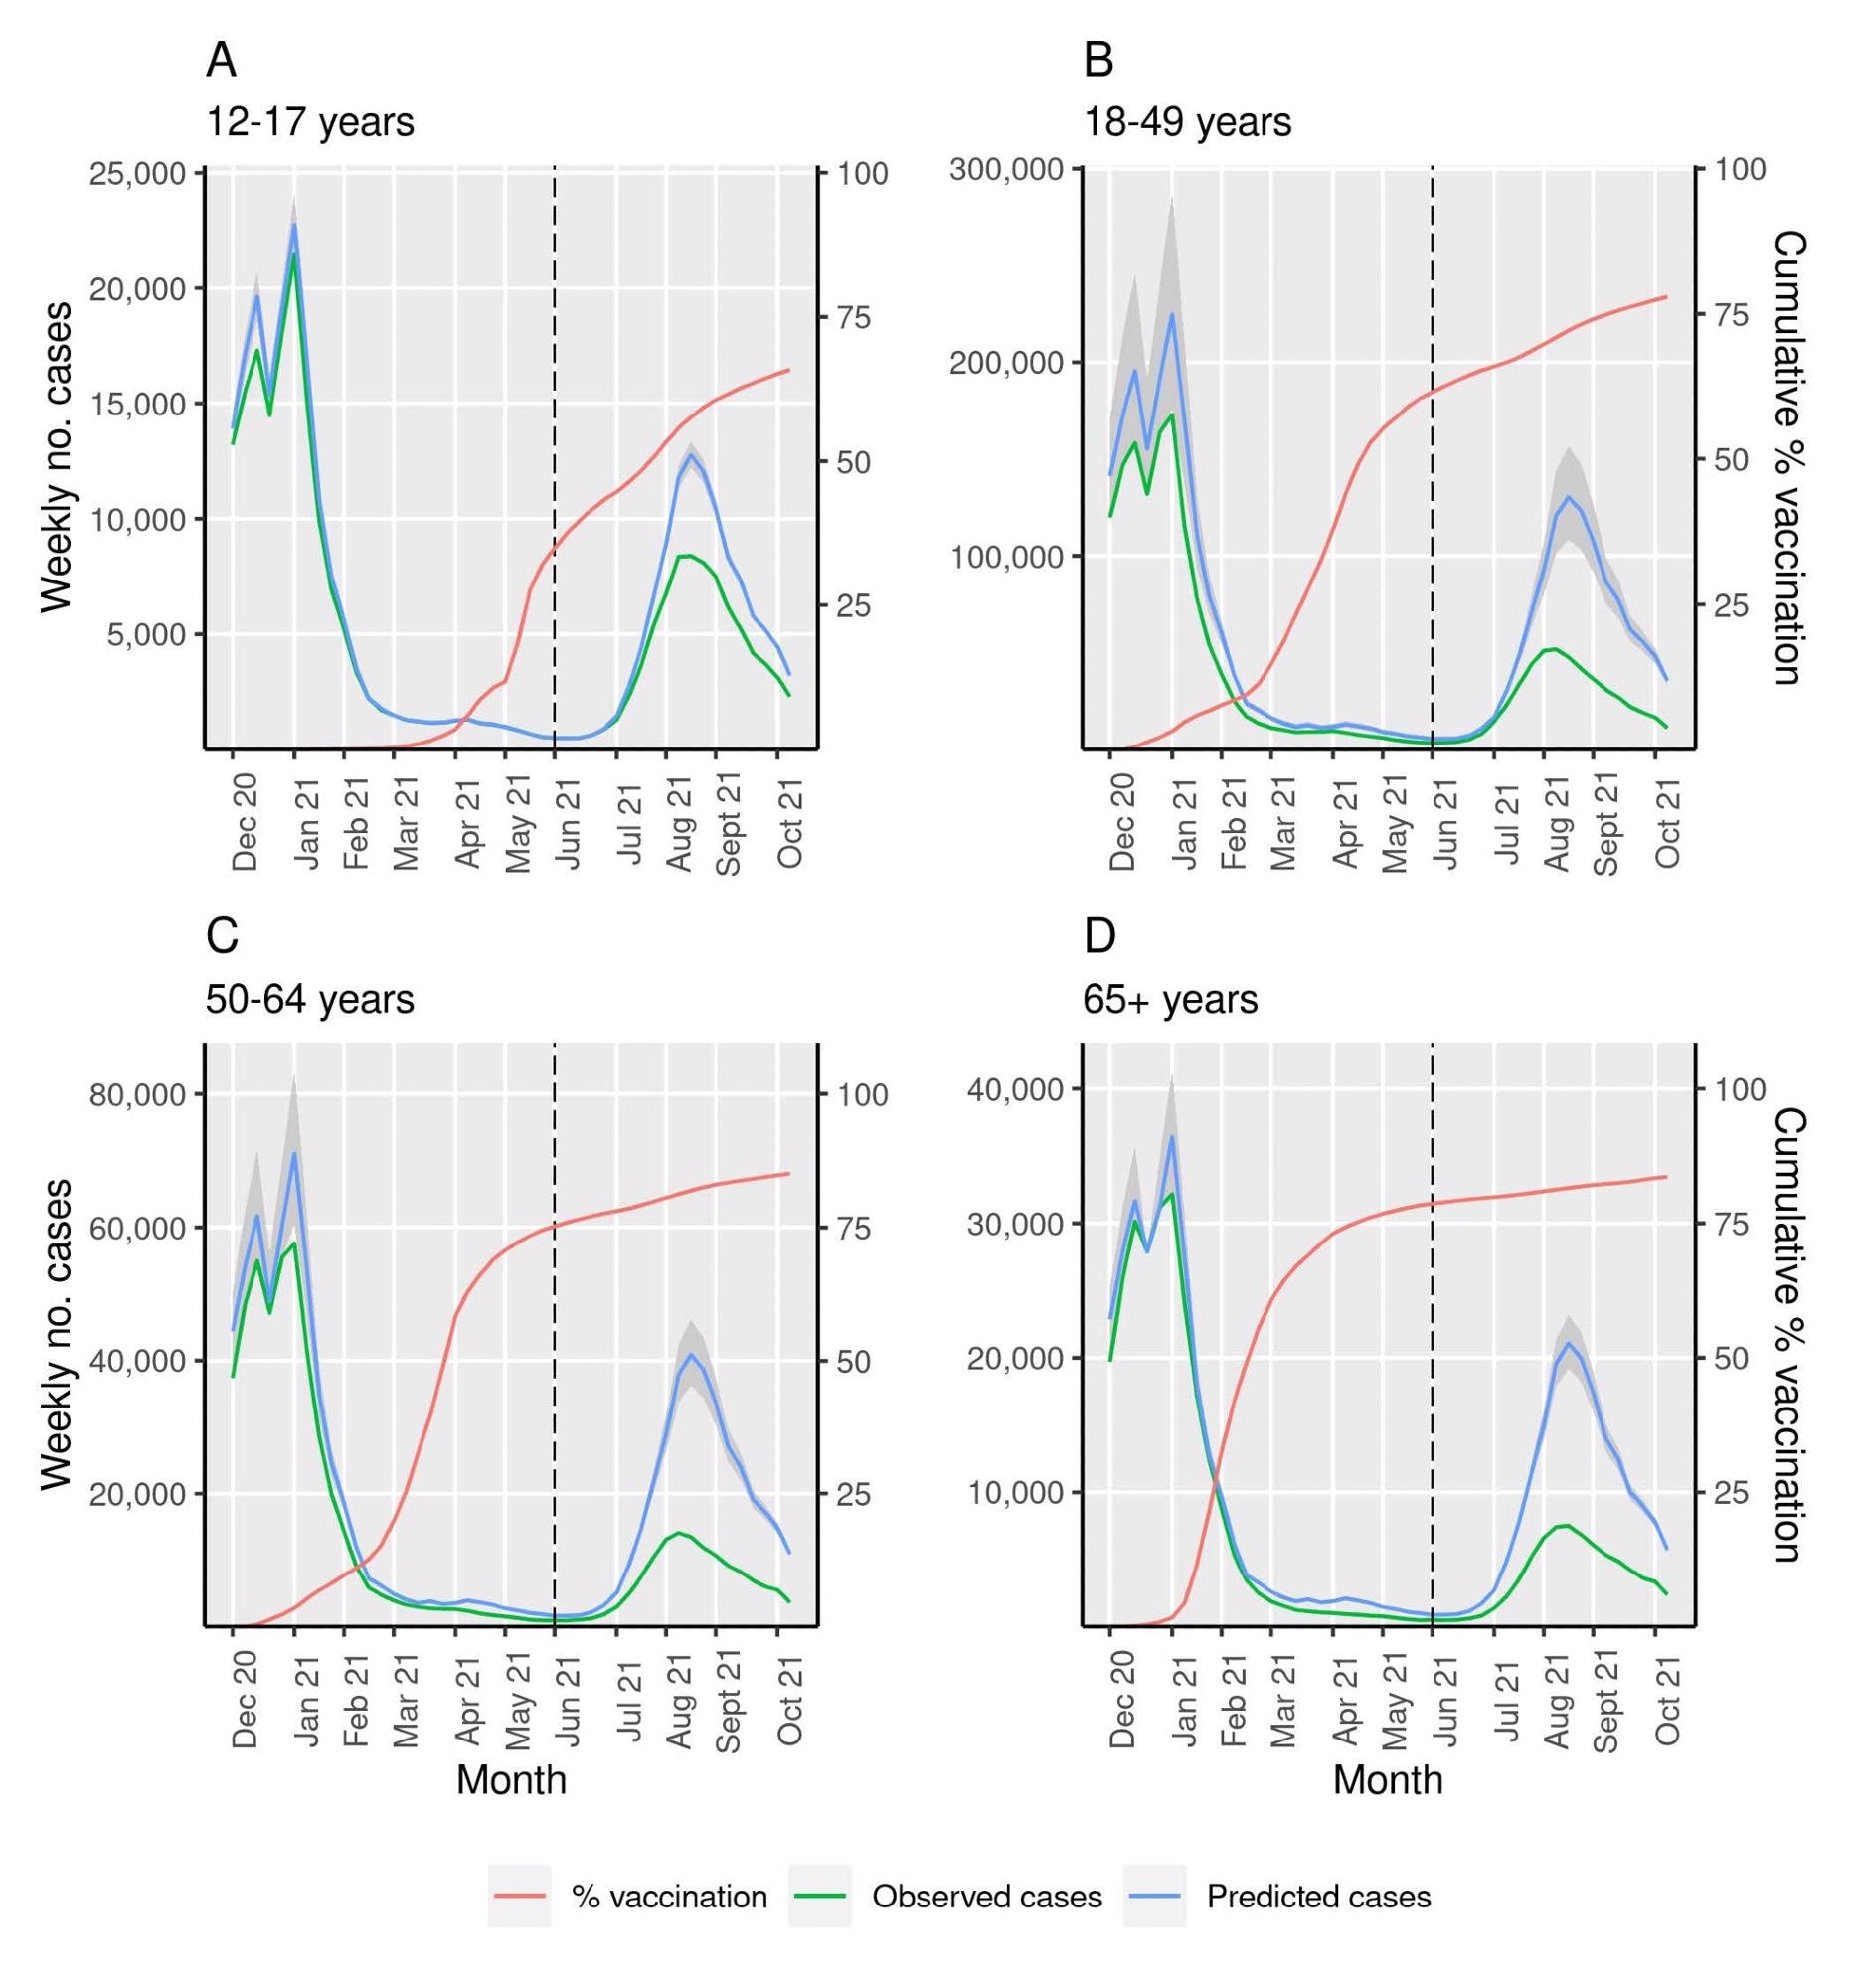 Primary model estimating averted COVID-19 cases due to COVID-19 vaccination in California by age group. We plotted observed COVID-19 cases (green) and vaccine coverage of at least one dose of a COVID-19 vaccine (red) over time in four age groups that represent the vaccine-eligible population: 12-17 years (A), 18-49 years (B), 50-64 years (C) and ≥65 years (D). In the primary analysis, we estimated the association between cases in the unvaccinated group (<12 years) and each vaccineeligible age-group before Phase 1a of vaccination to predict COVID-19 cases in each vaccine-eligible age-group in absence of vaccination (blue) with prediction intervals in grey. The dashed line (black) represents introduction of the delta variant in California. The difference between predicted COVID-19 cases without vaccination (blue) and observed COVID-19 cases with vaccine (green) represents the averted COVID-19 cases due to vaccination.